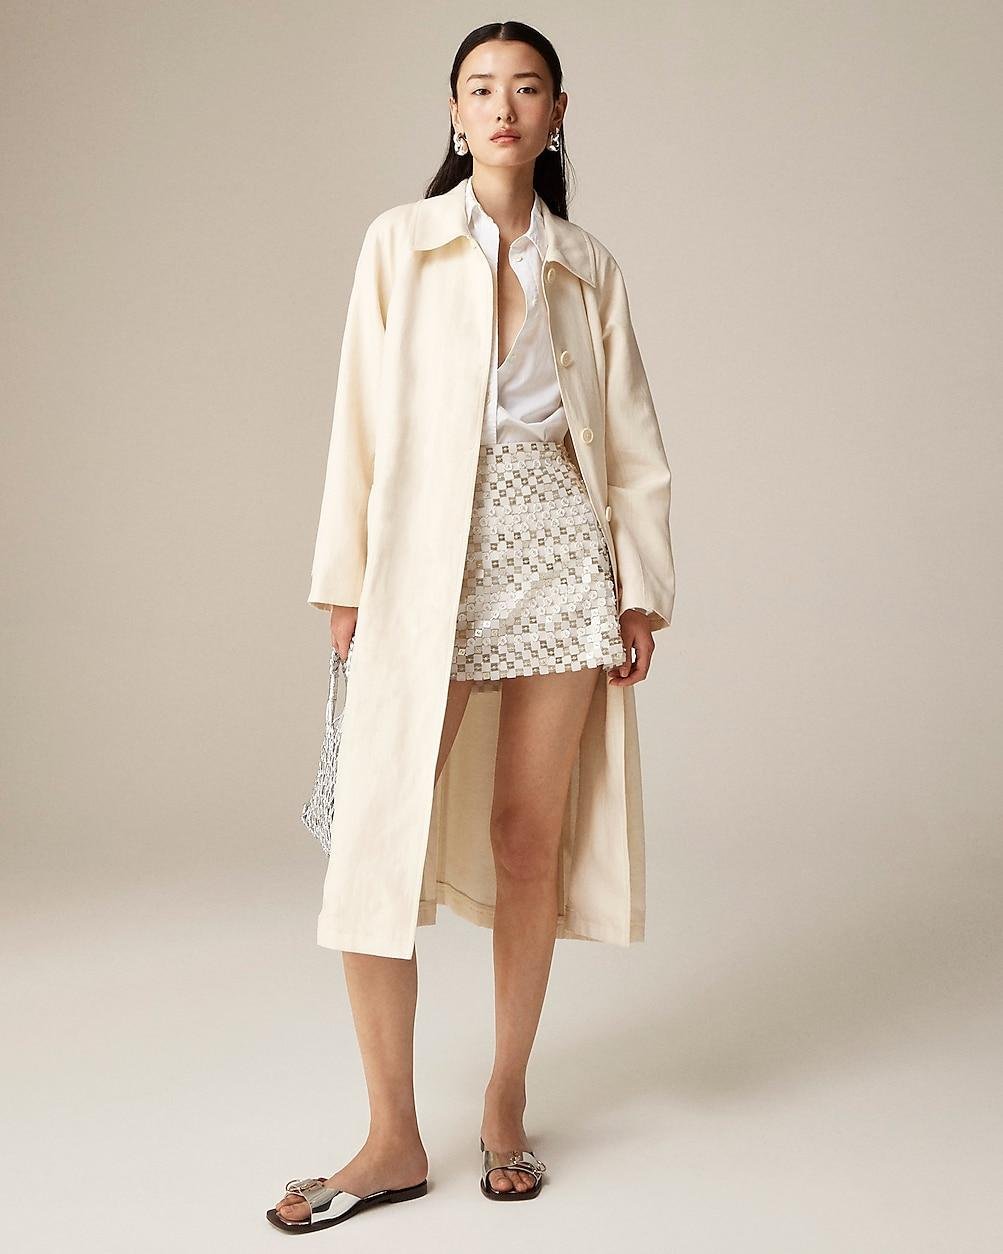 Lightweight trench coat in linen-cupro blend by J.CREW